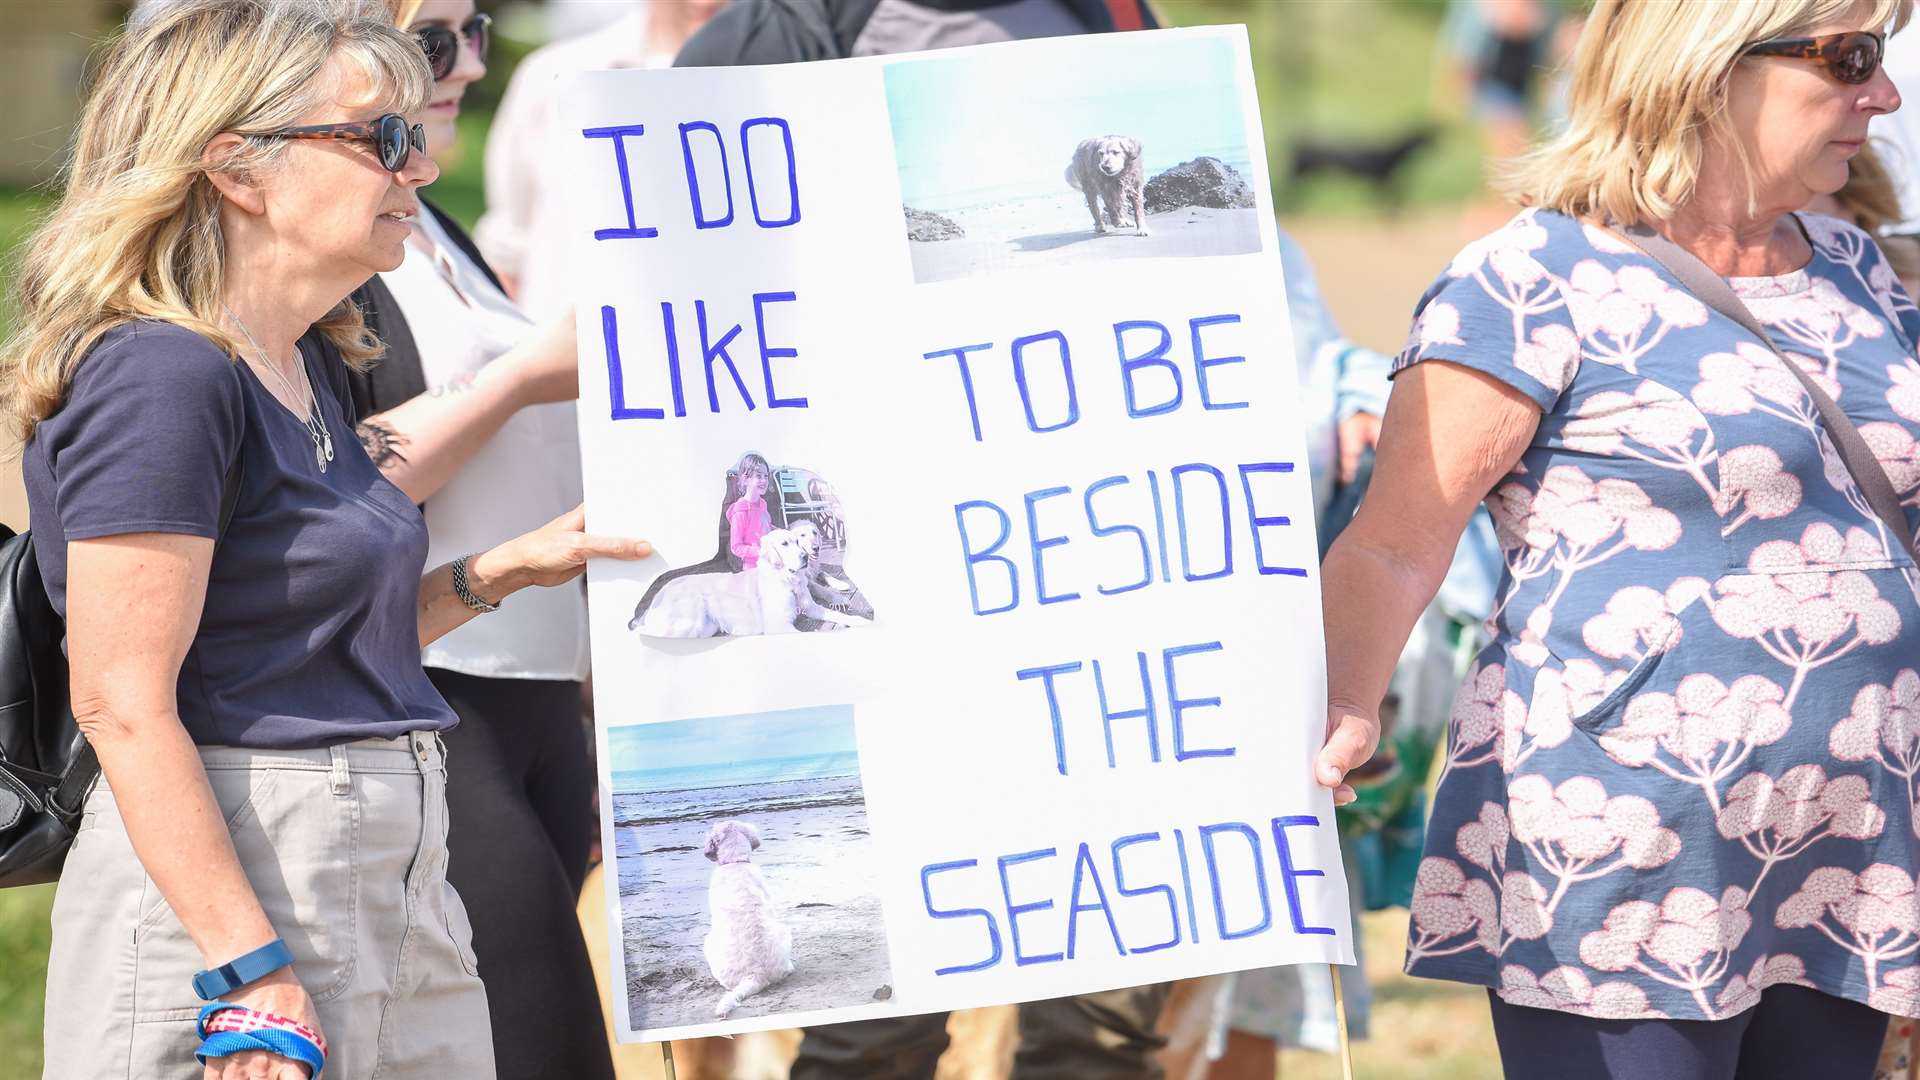 Dog walkers protest against proposal to ban dogs from the beach.